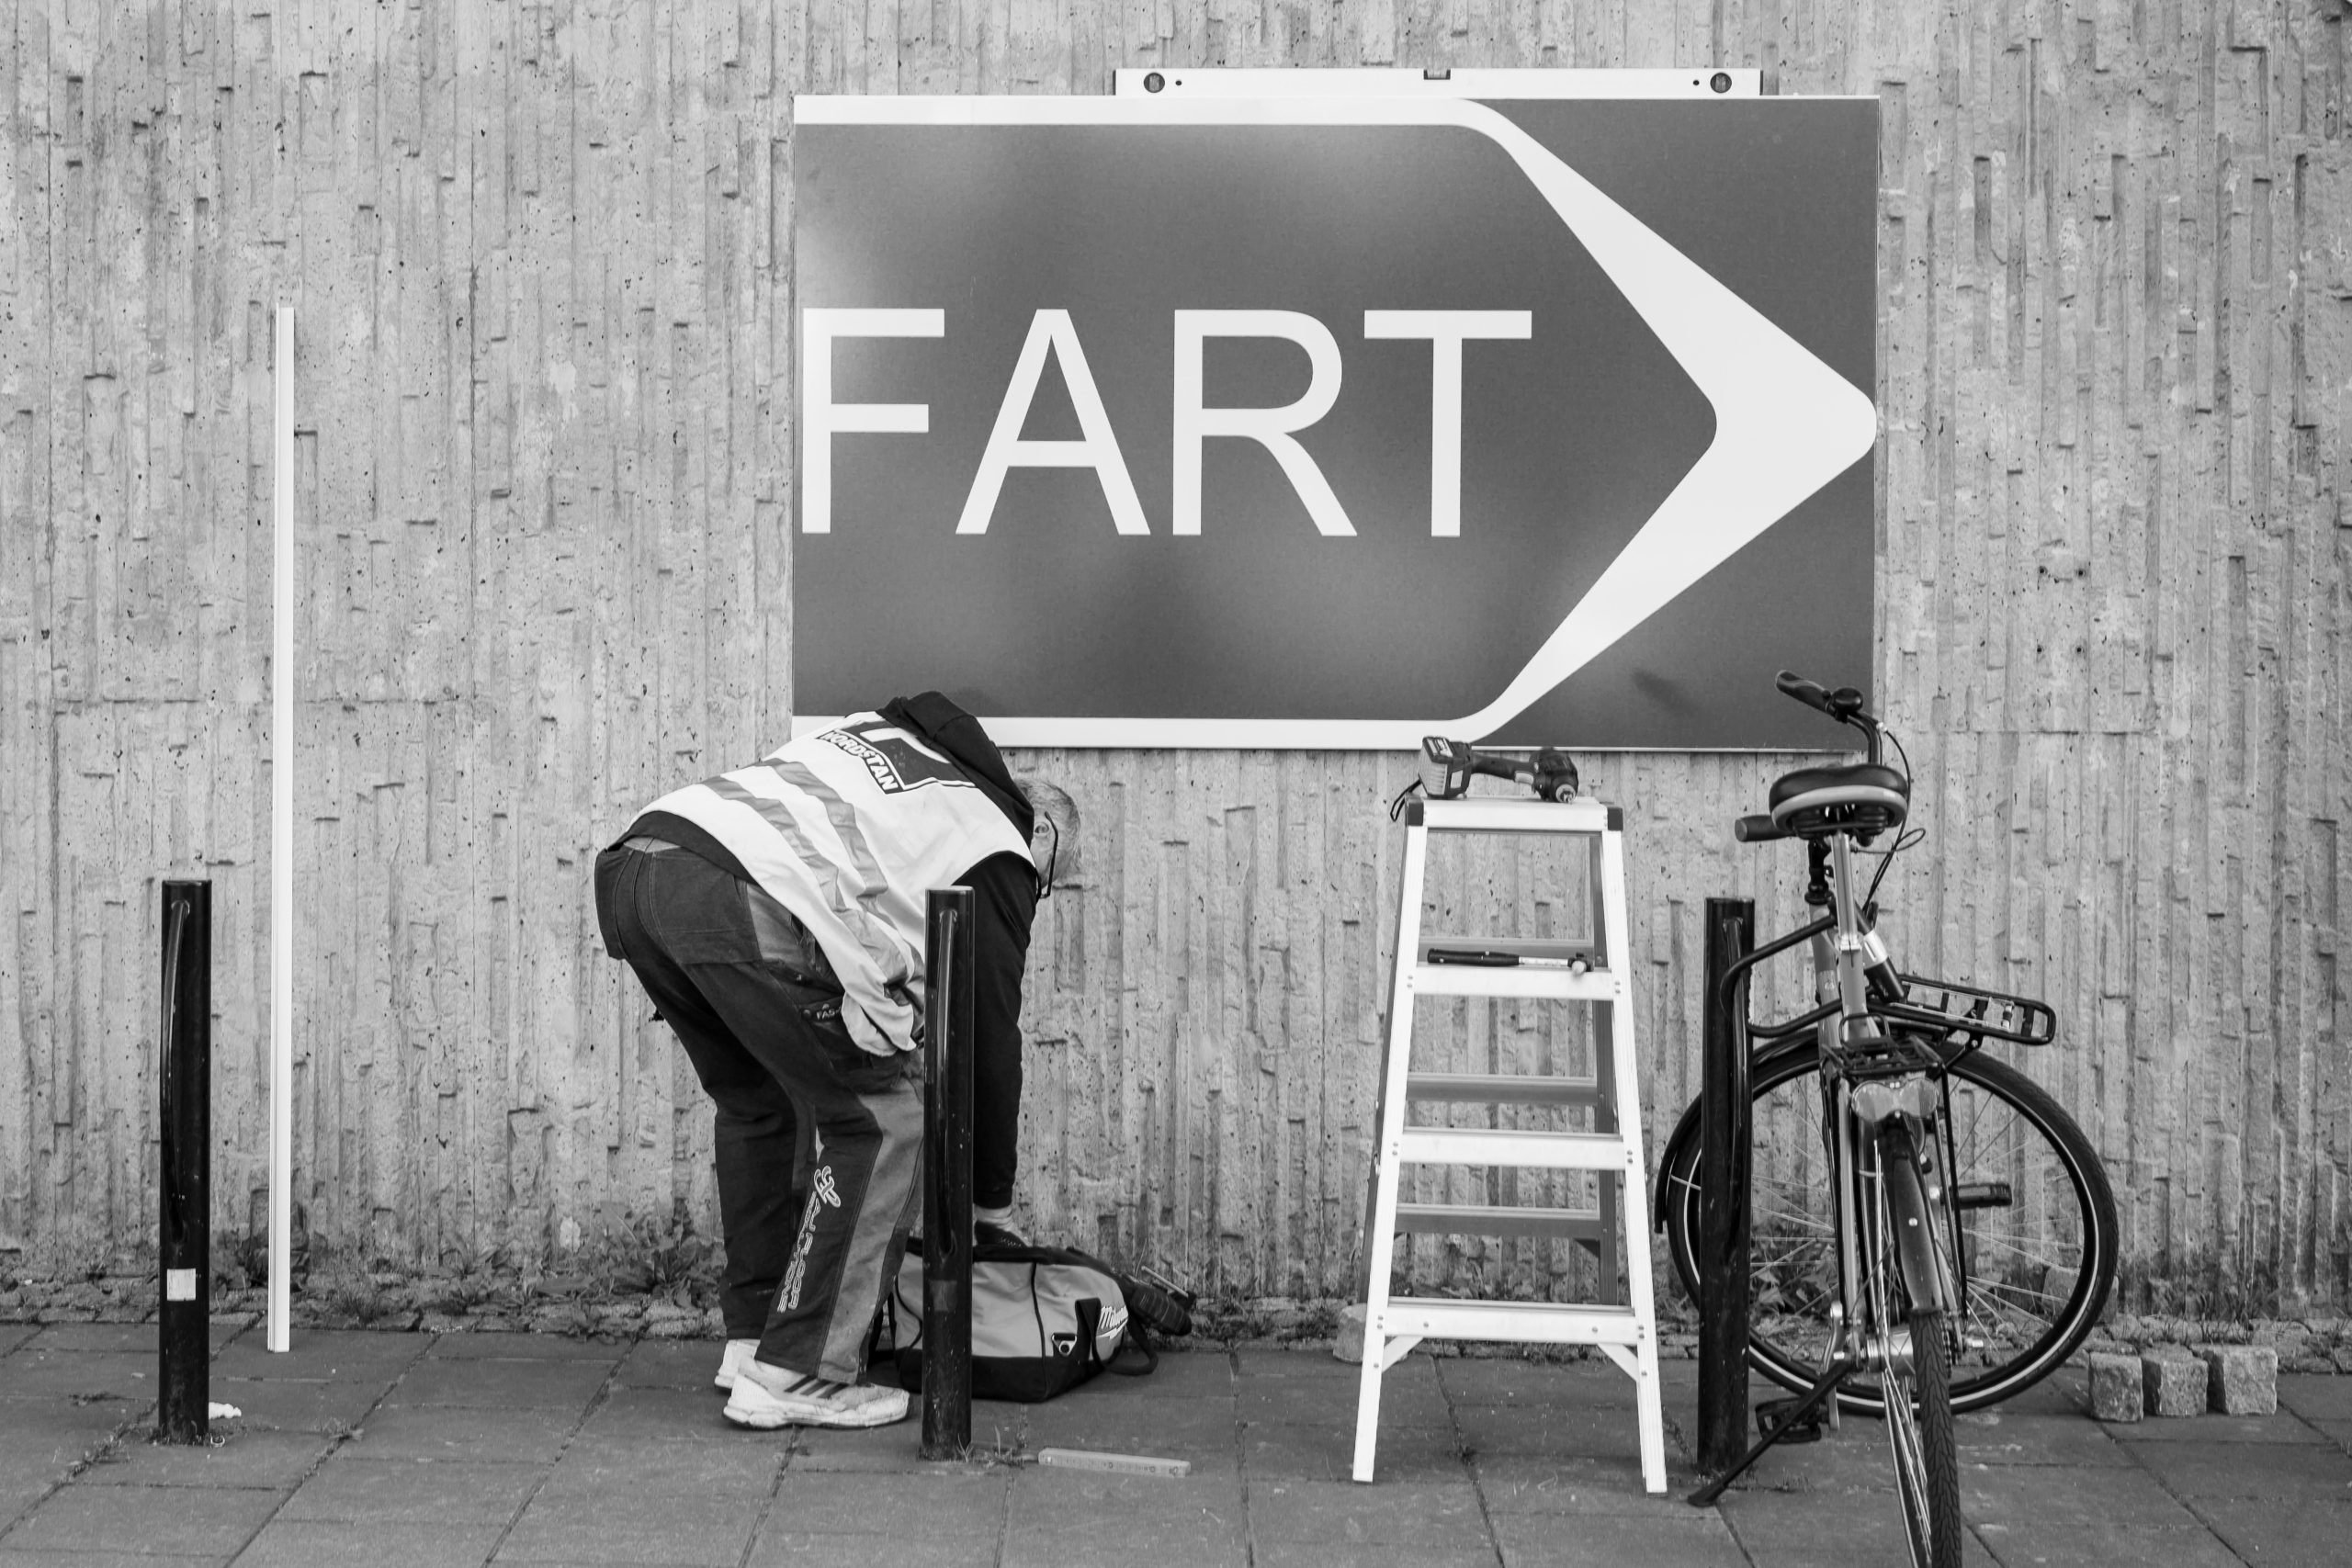 01-s-yt71968-Fart-scaled